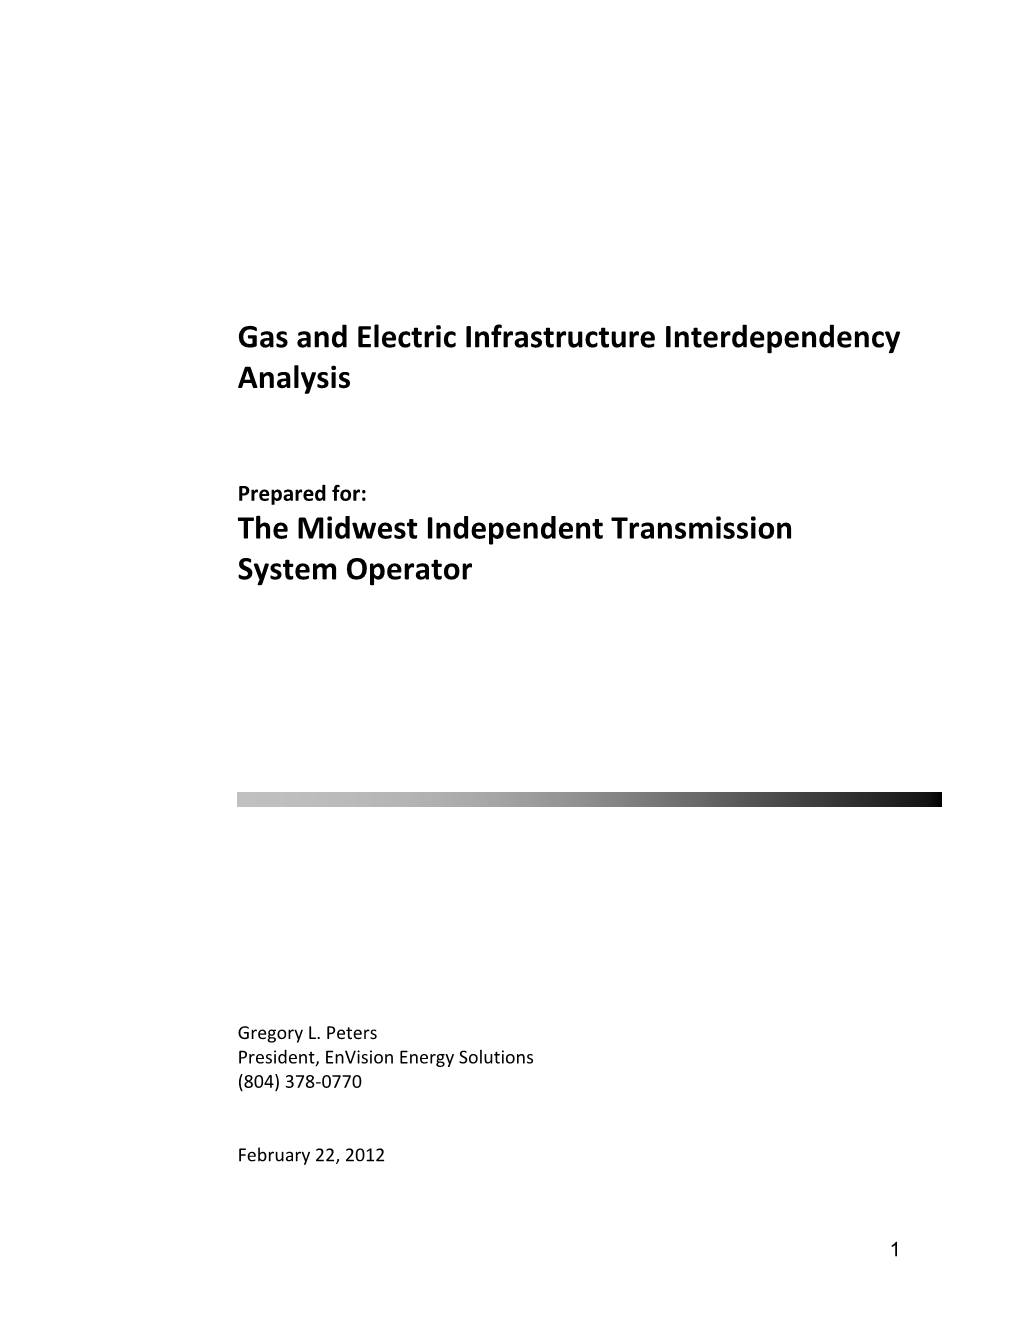 Gas & Electric Infrastructure Interdependency Anaylsis